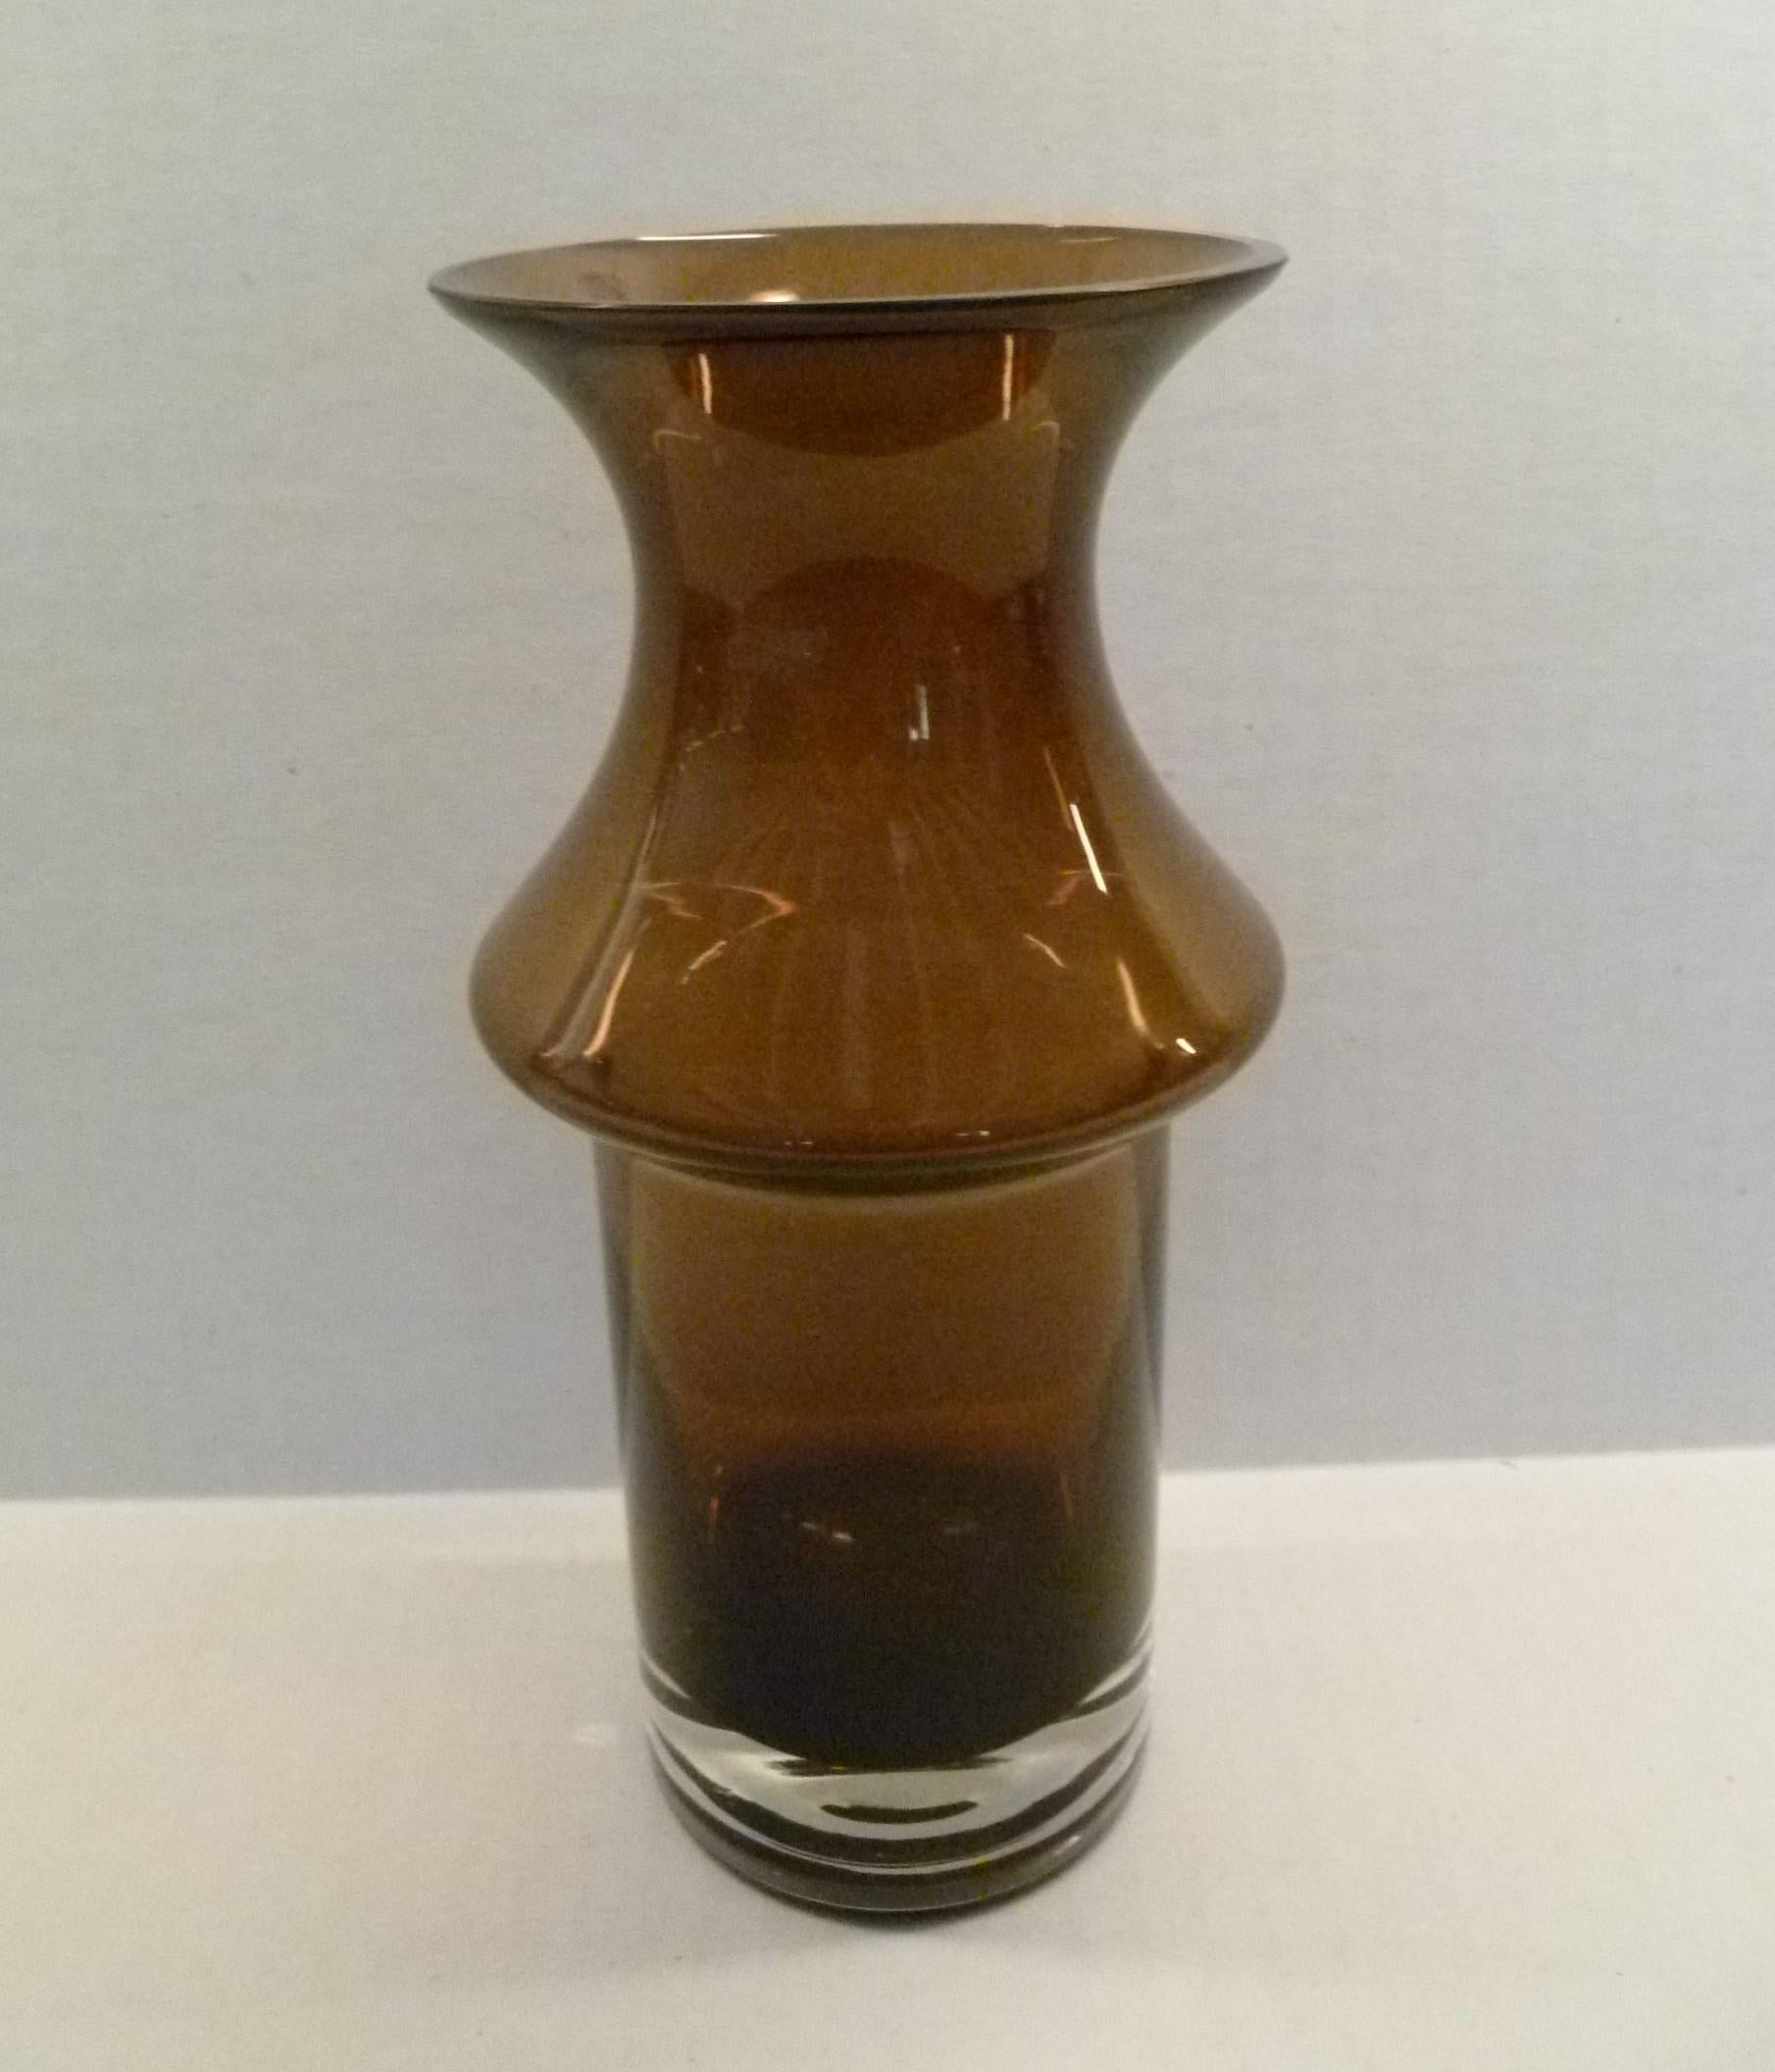 The Tulppaani (Tulip) Collection of vases by Tamara Aladin ( b.1932) for Riihimaki consisted of slightly different shapes and colors and were produced from 1971 until the end of art glass production by the company in 1976. This vase in warm brown